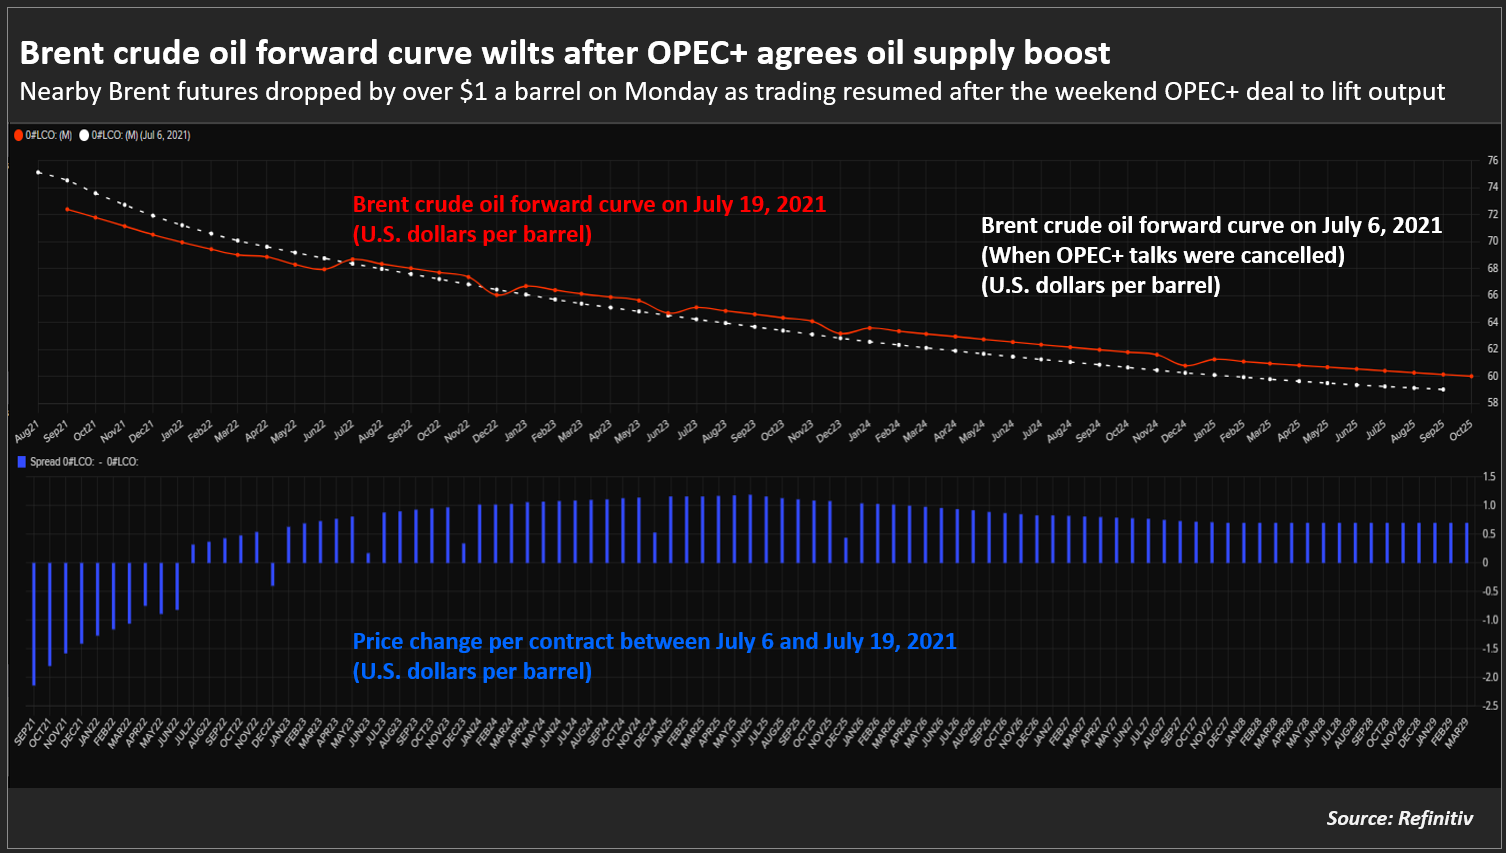 Brent crude oil forward curve wilts after OPEC+ deal